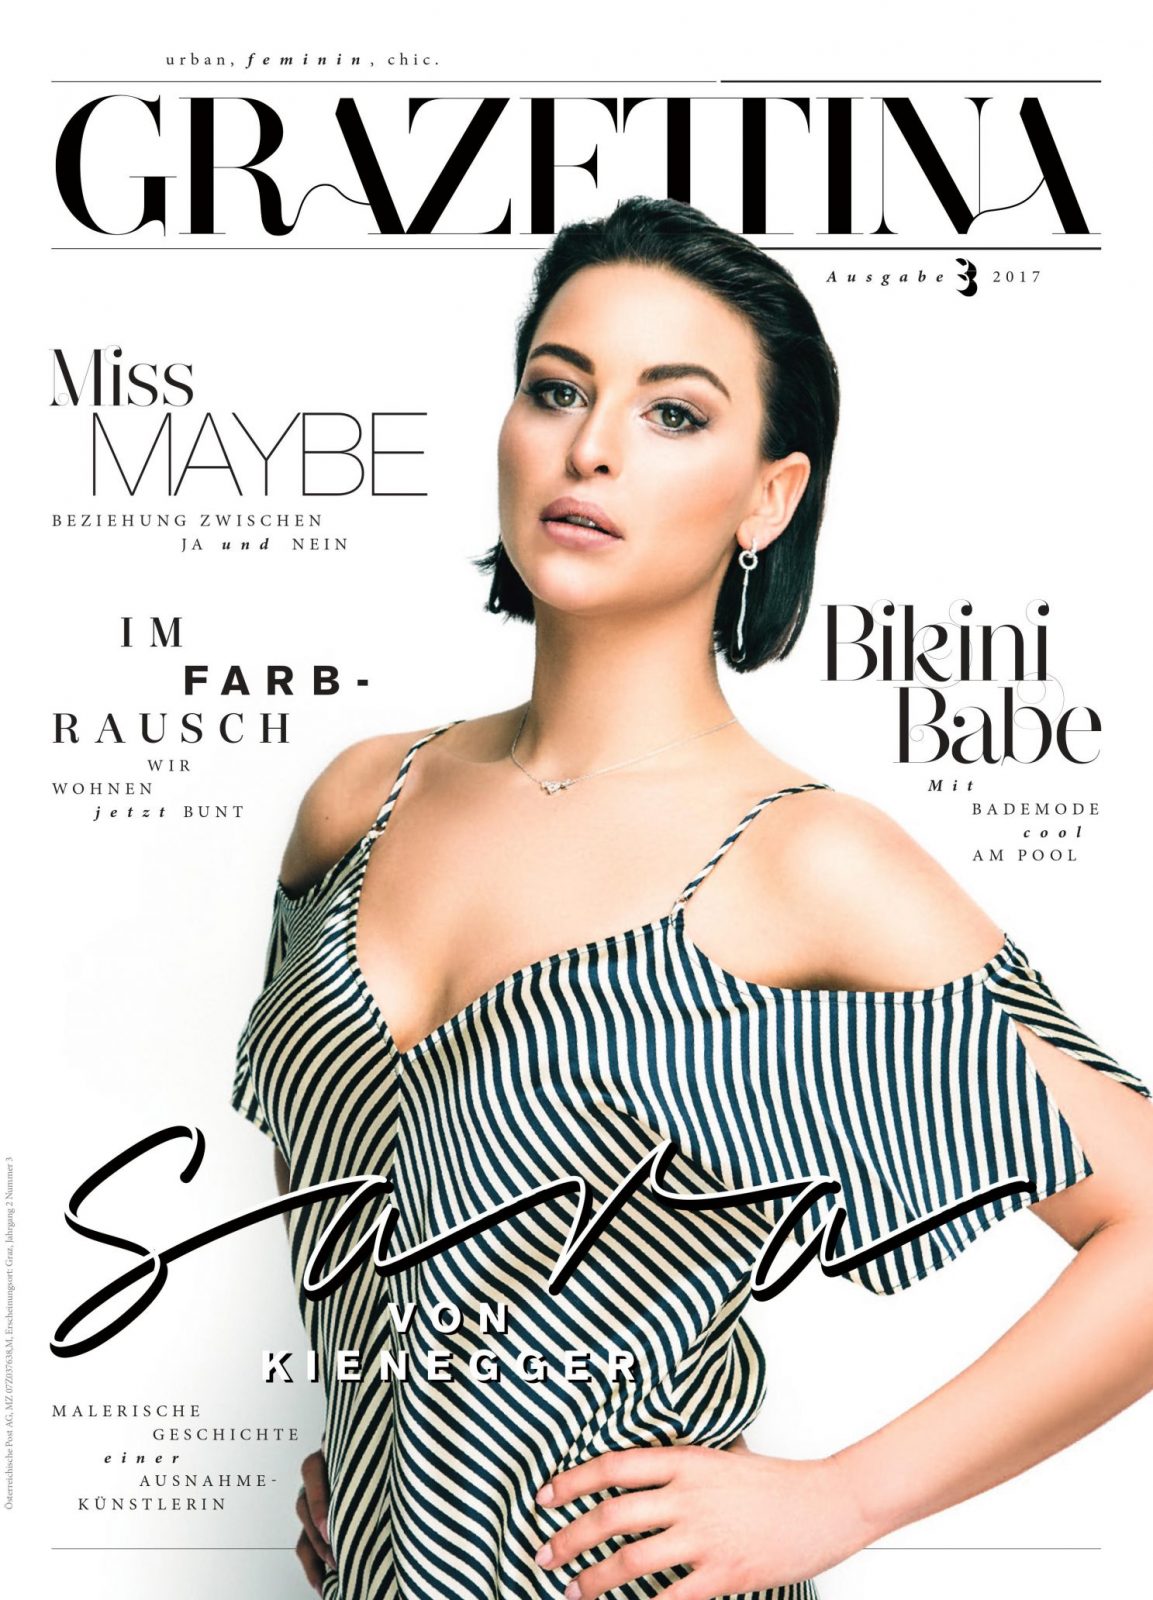 Is There a New Style Trending in Magazine Covers?